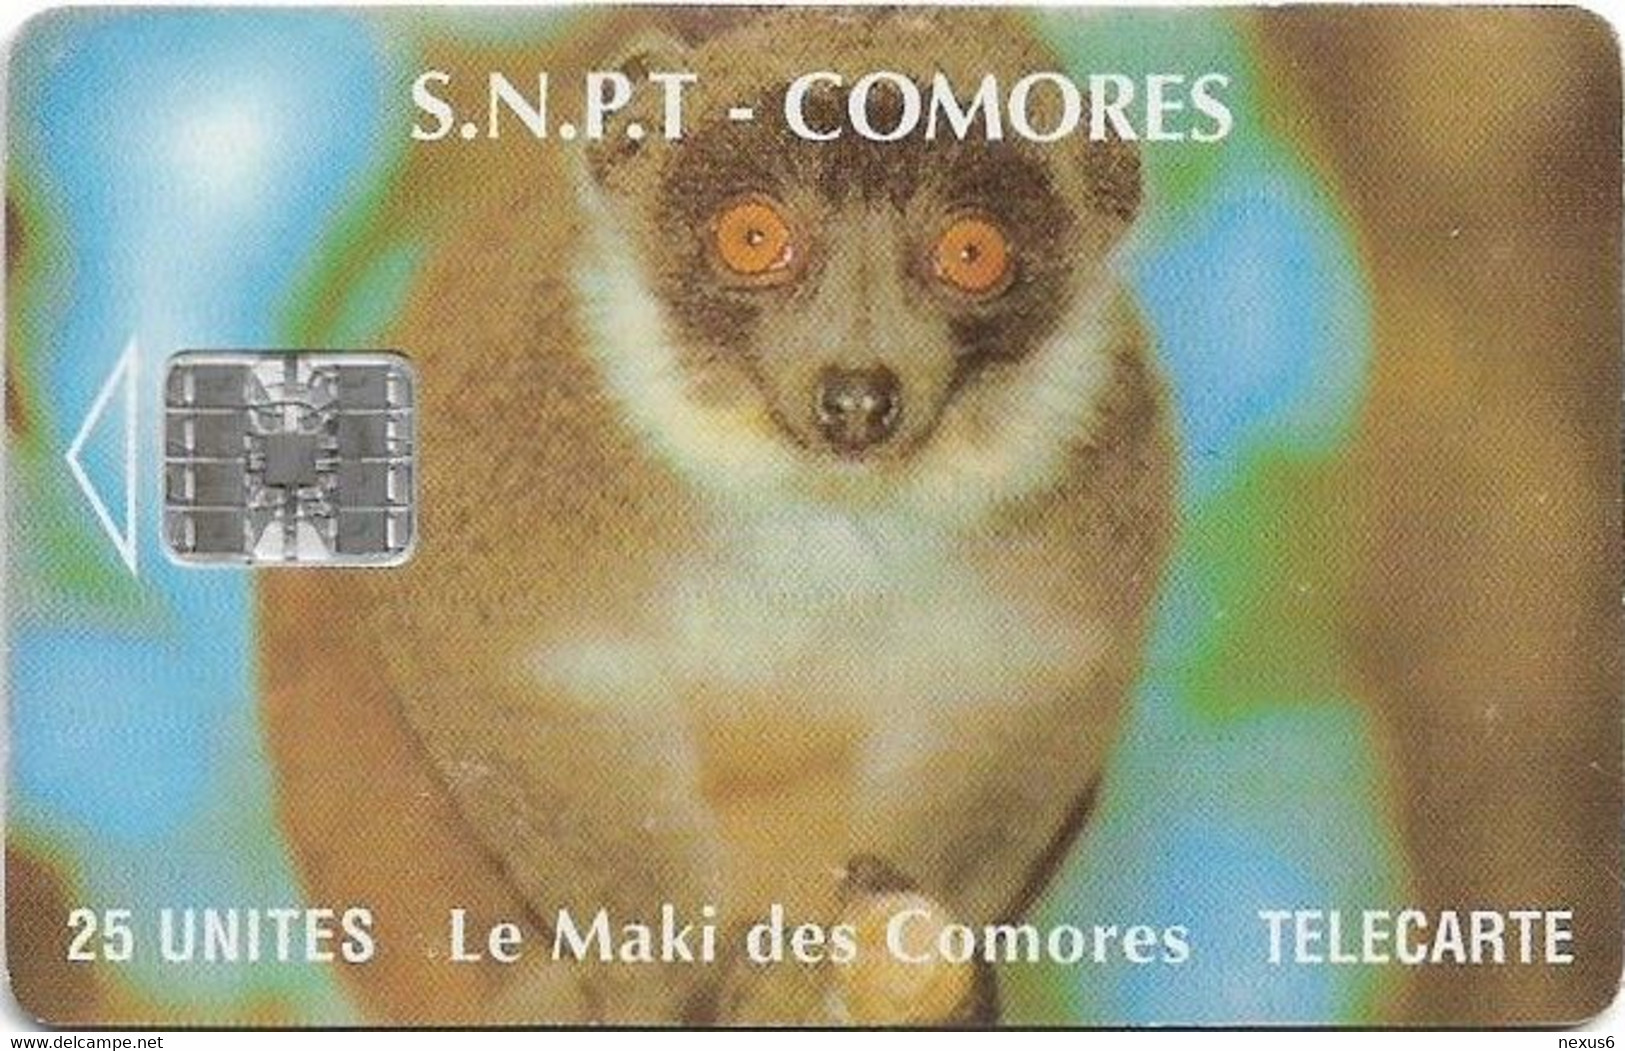 Comoros - S.N.P.T. - Maki, Without Moreno Up Right, Without Cn., SC7, 1994, 25Units, Used - Comoros